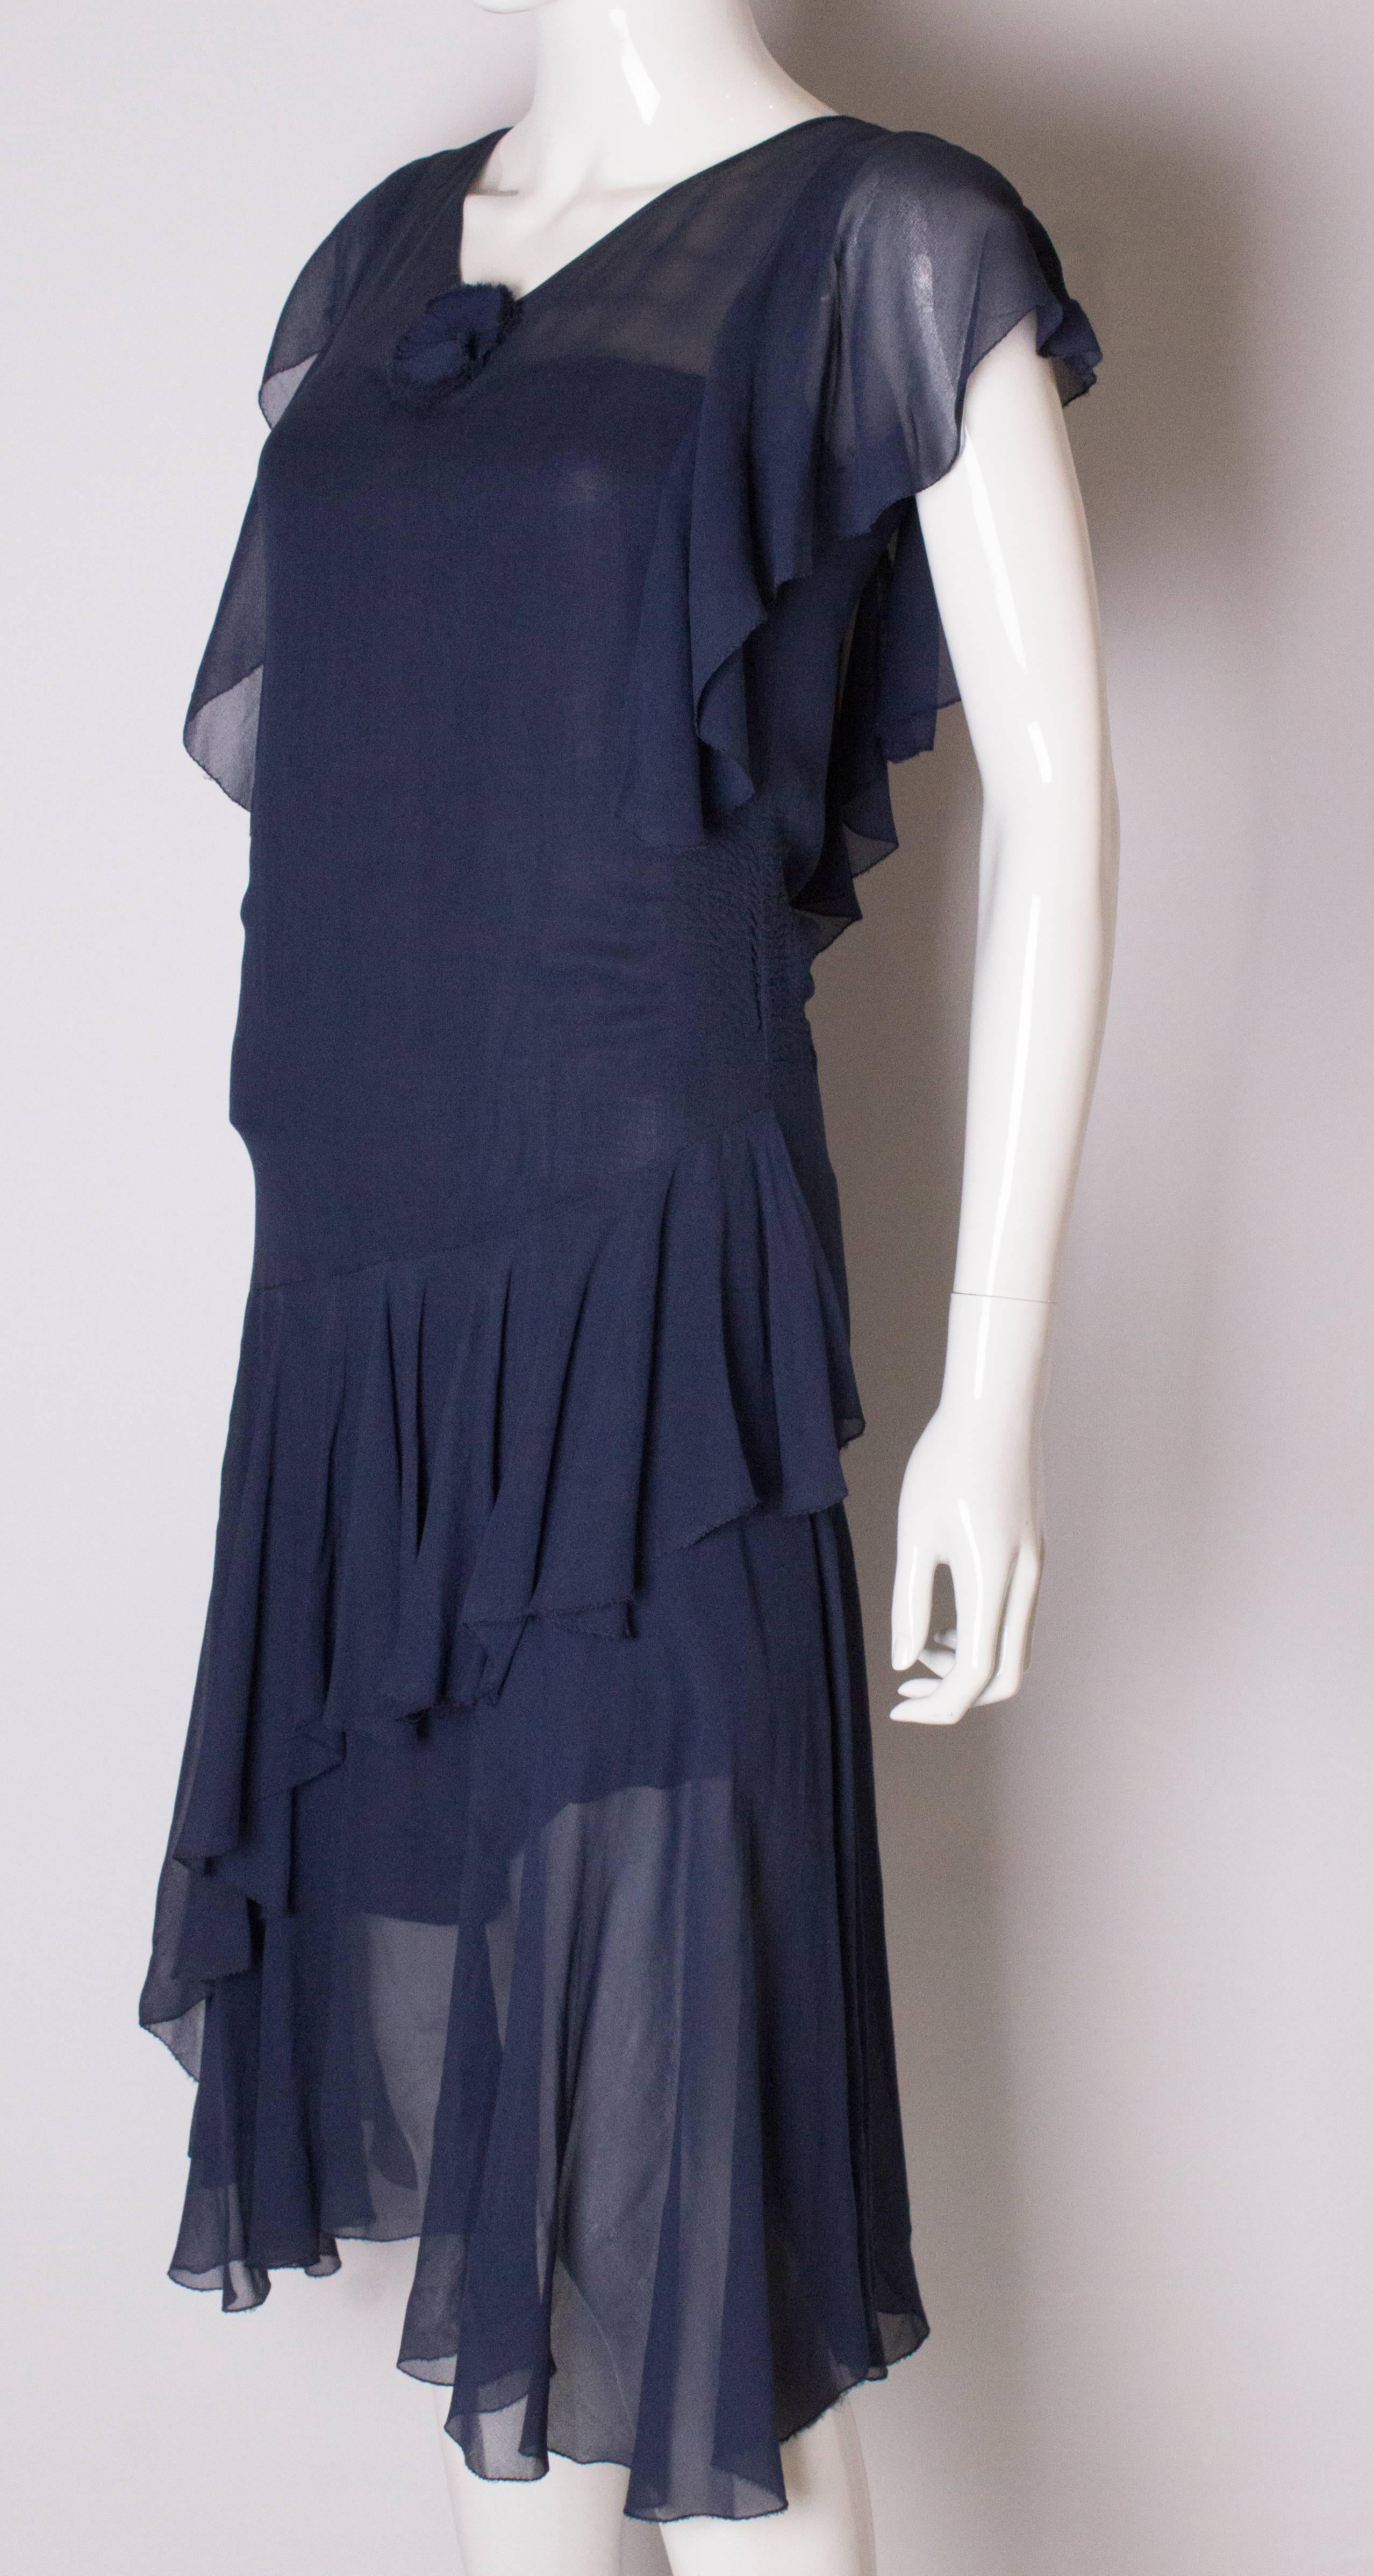 Vintage French Navy Chiffon Dress In Good Condition For Sale In London, GB